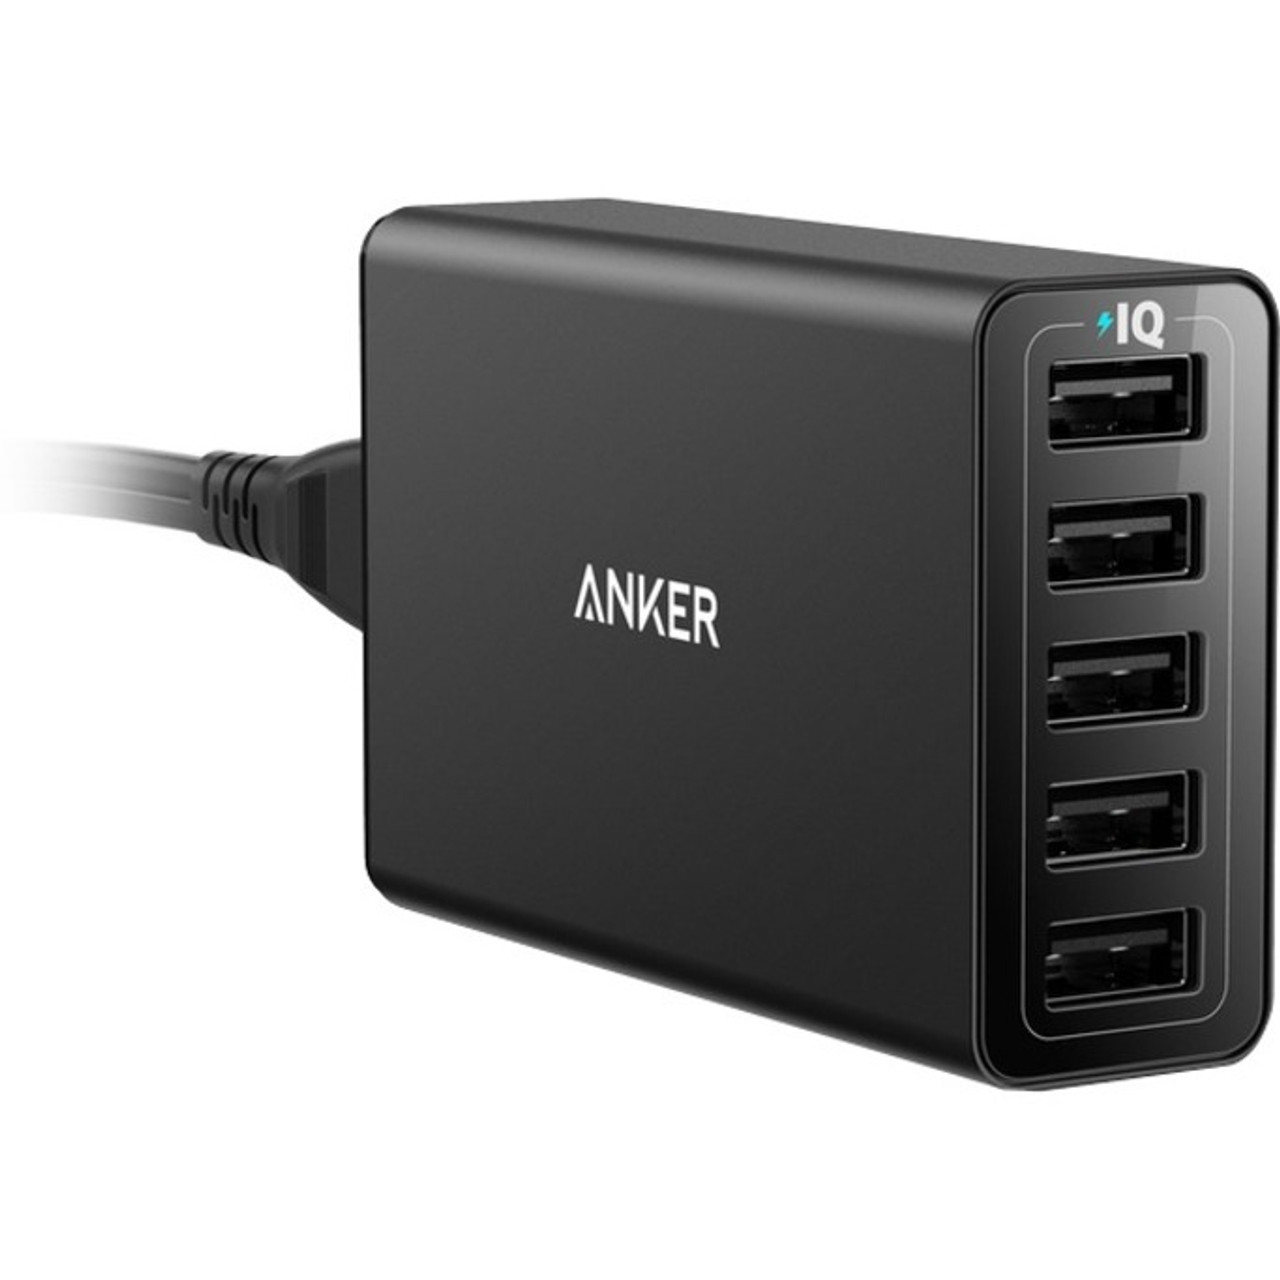 Anker PowerPort 5 Wall Charger A2124 - A2124Z12